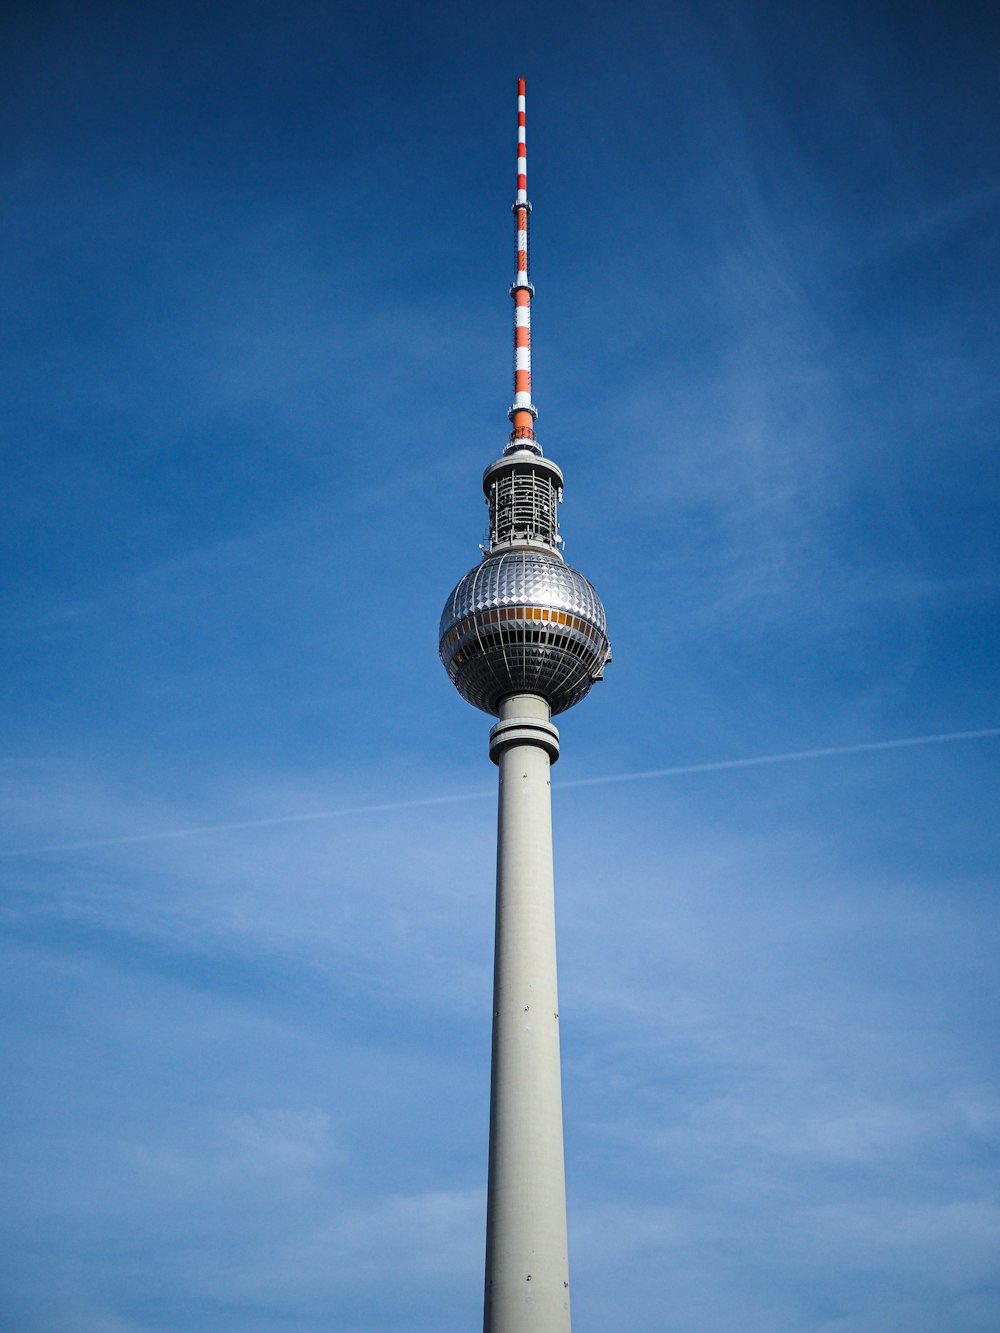 a tall tower with a pointy top with Fernsehturm Berlin in the background